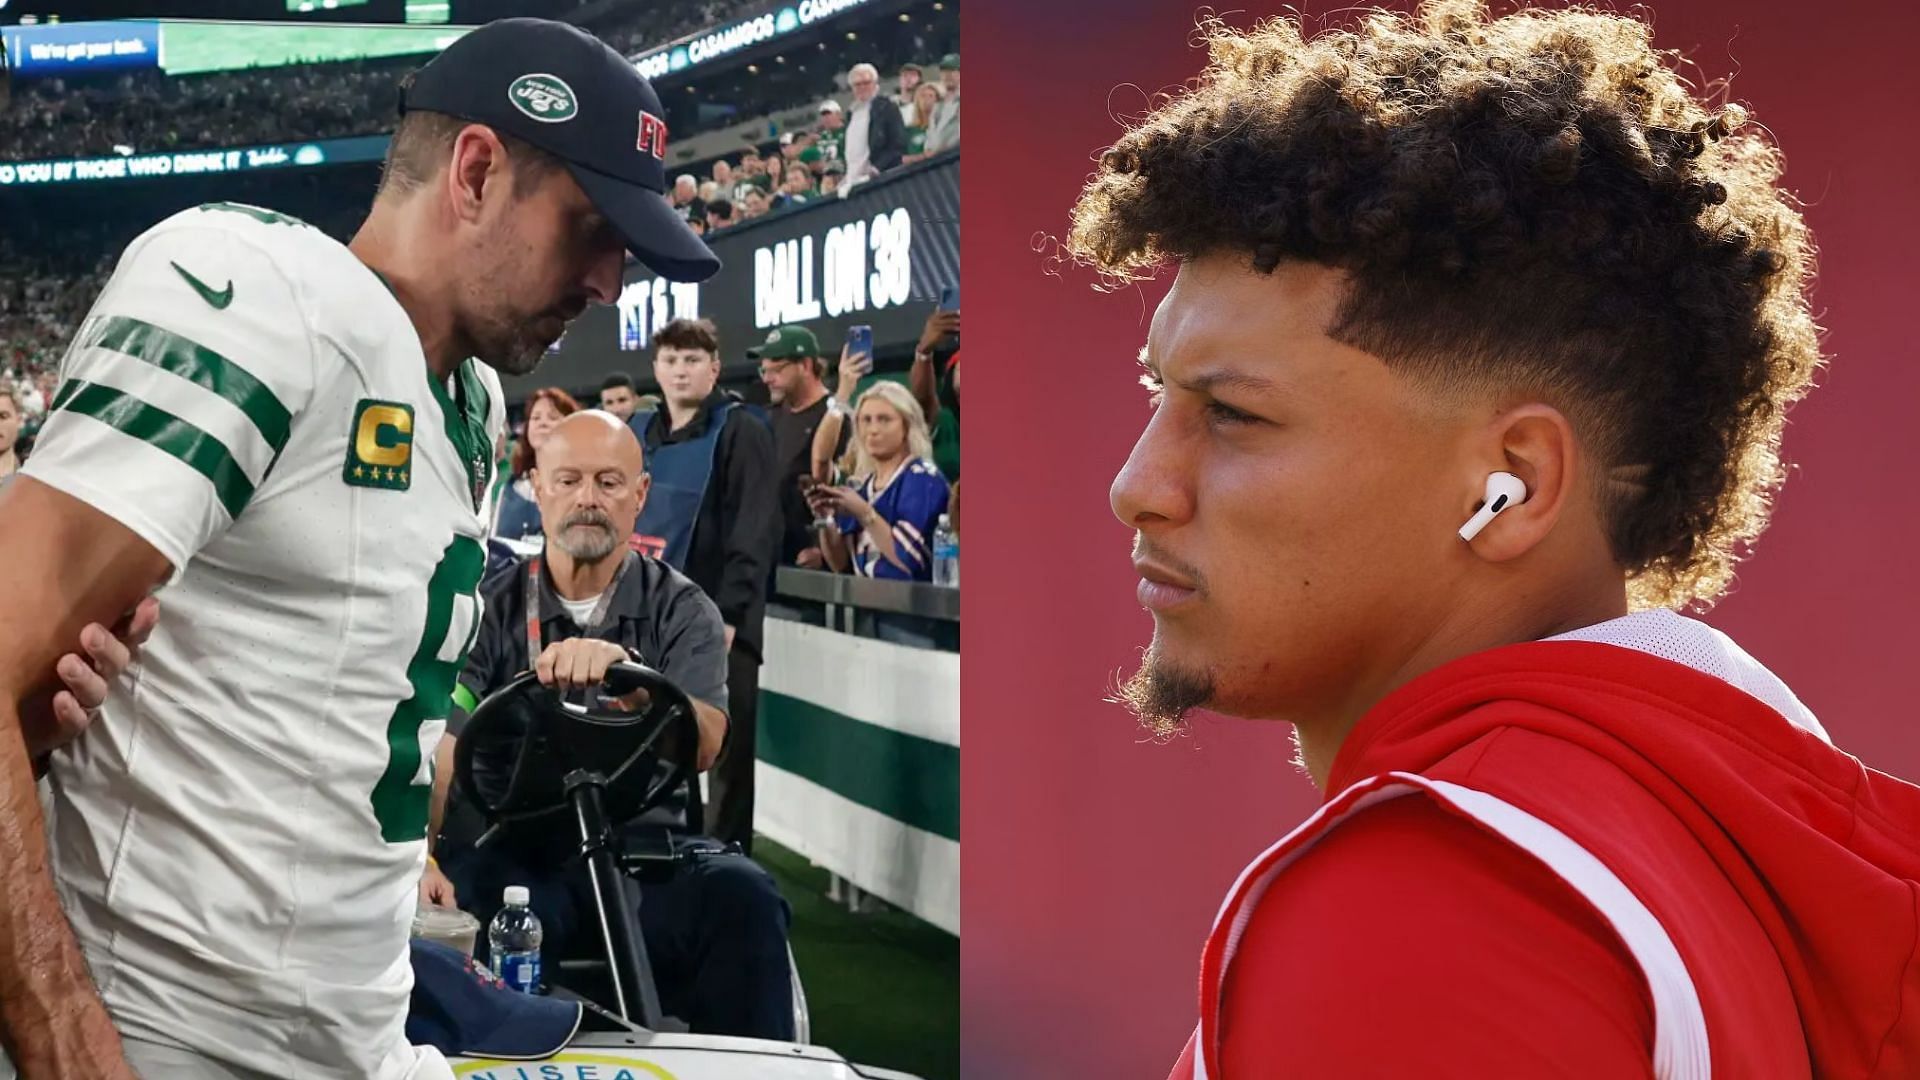 Patrick Mahomes: The Nfl should bring back grass fields